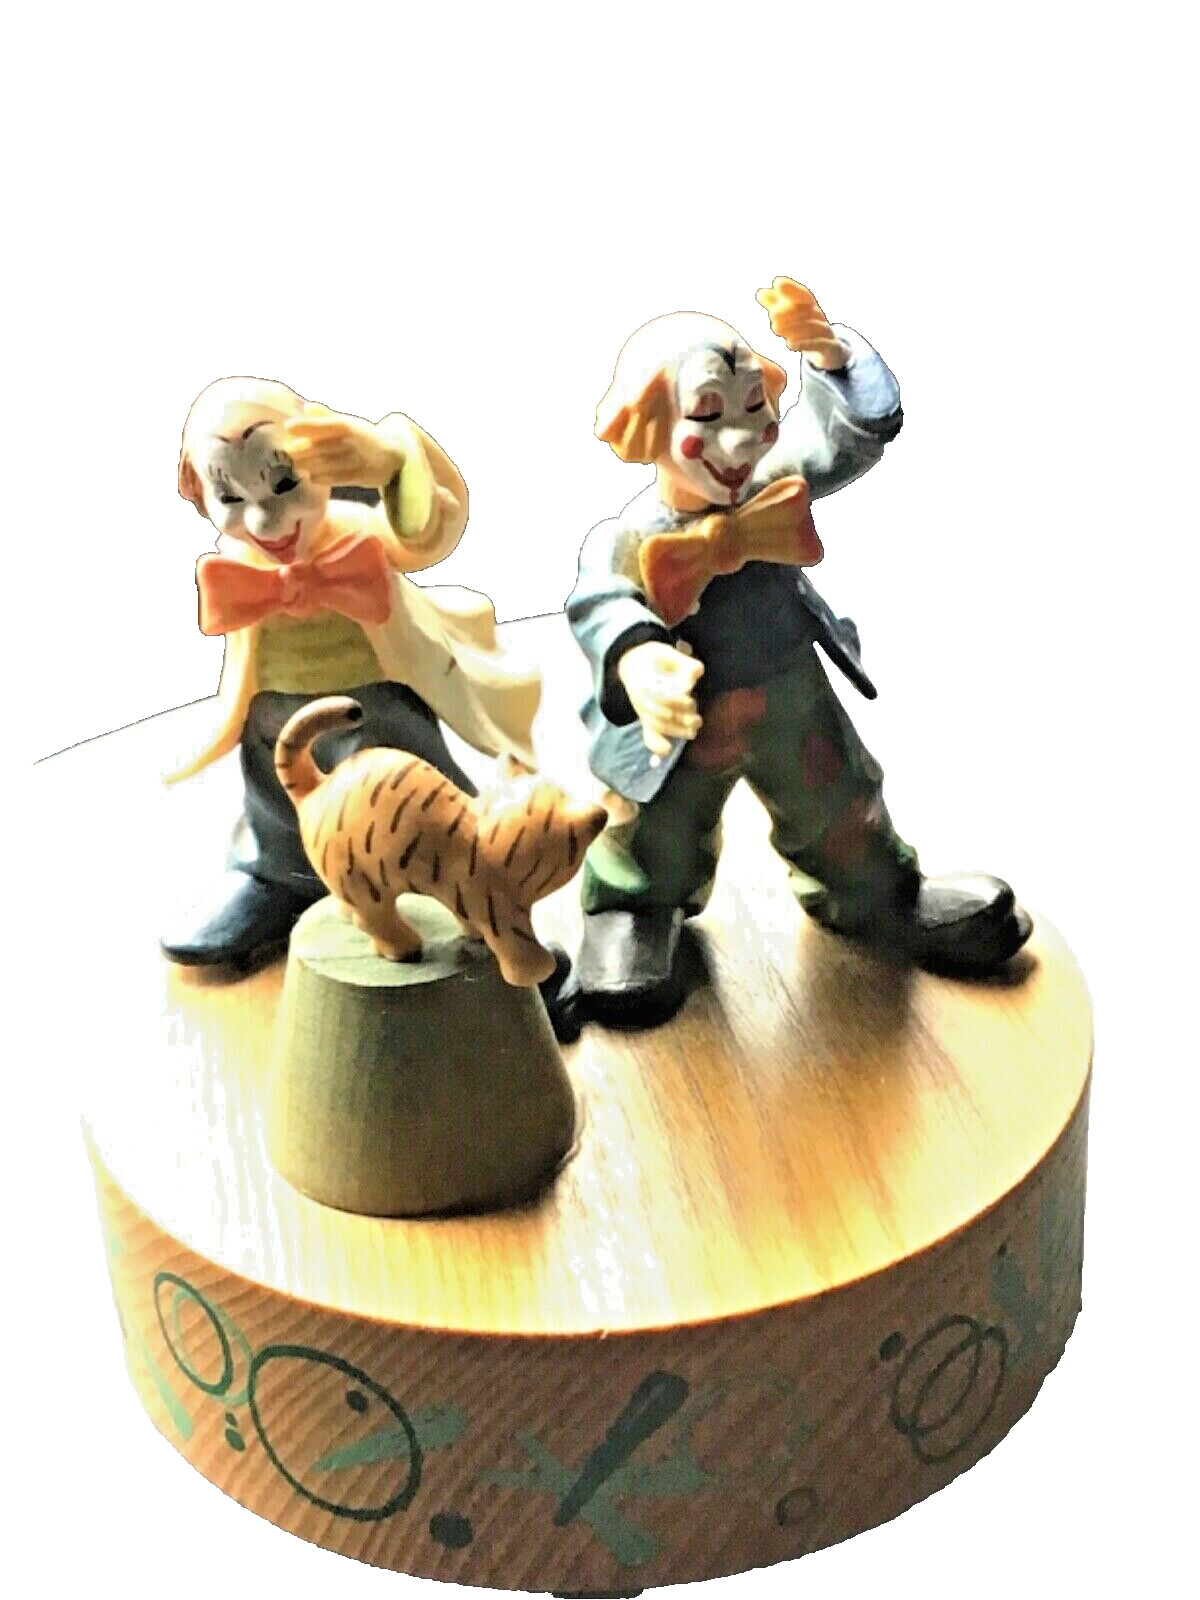 VINTAGE ANRI Wooden Music Box CLOWNS AND KITTEN PLAYS “THE ENTERTAINER”